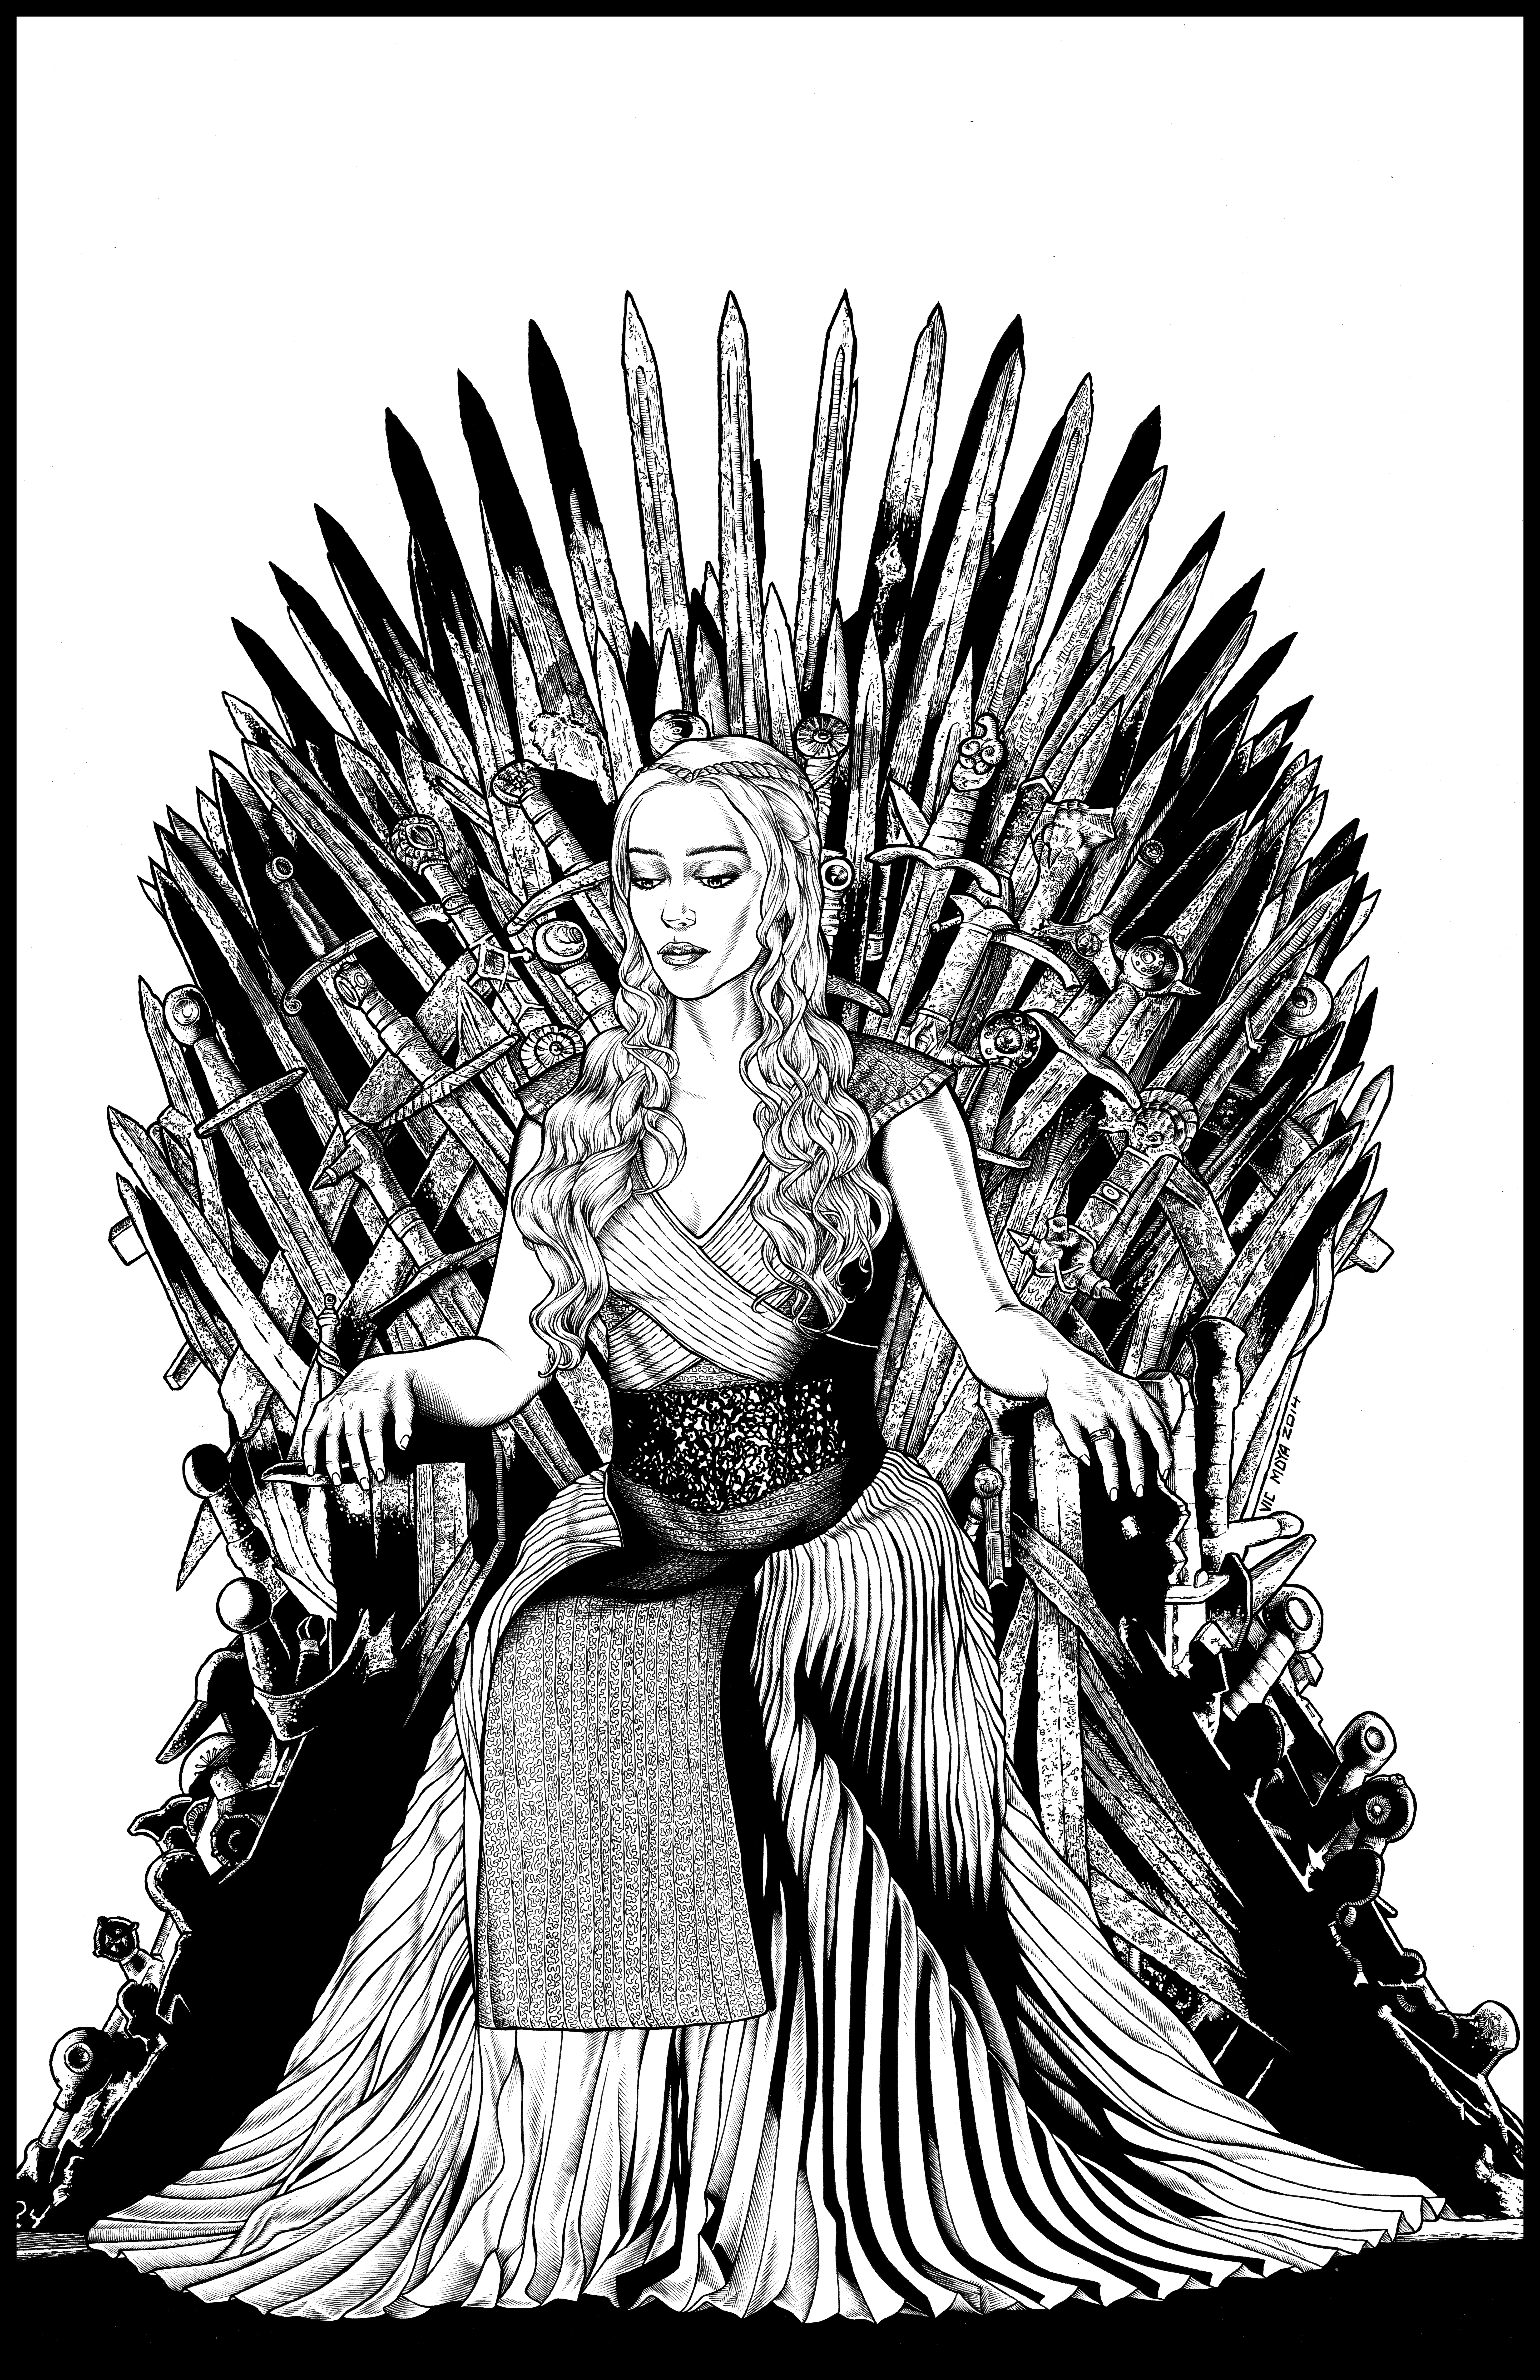 Iron Throne Dimensions & Drawings | Dimensions.com